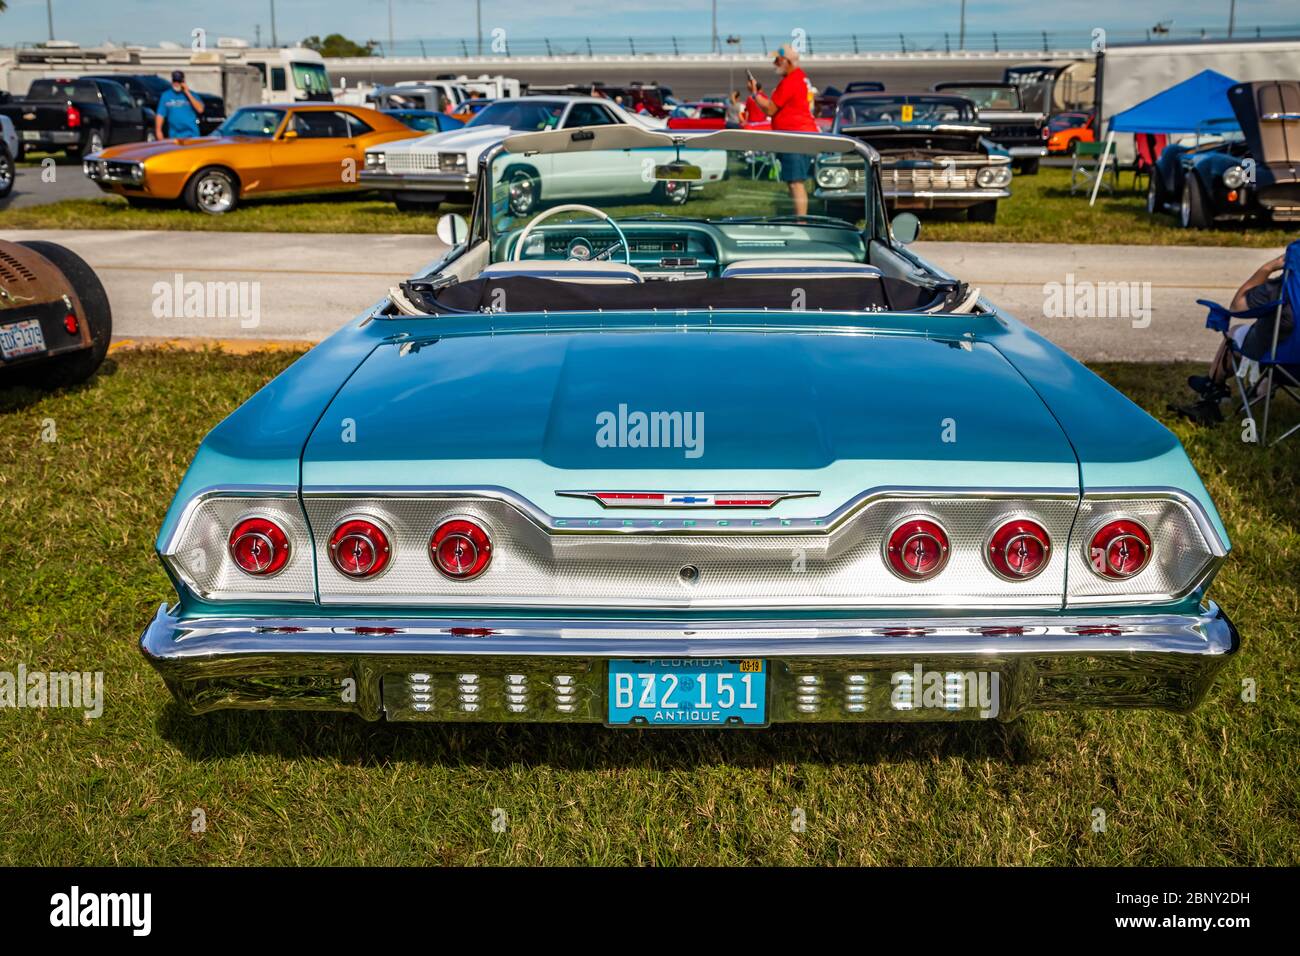 1963 Chevrolet Impala High Resolution Stock Photography And Images Alamy